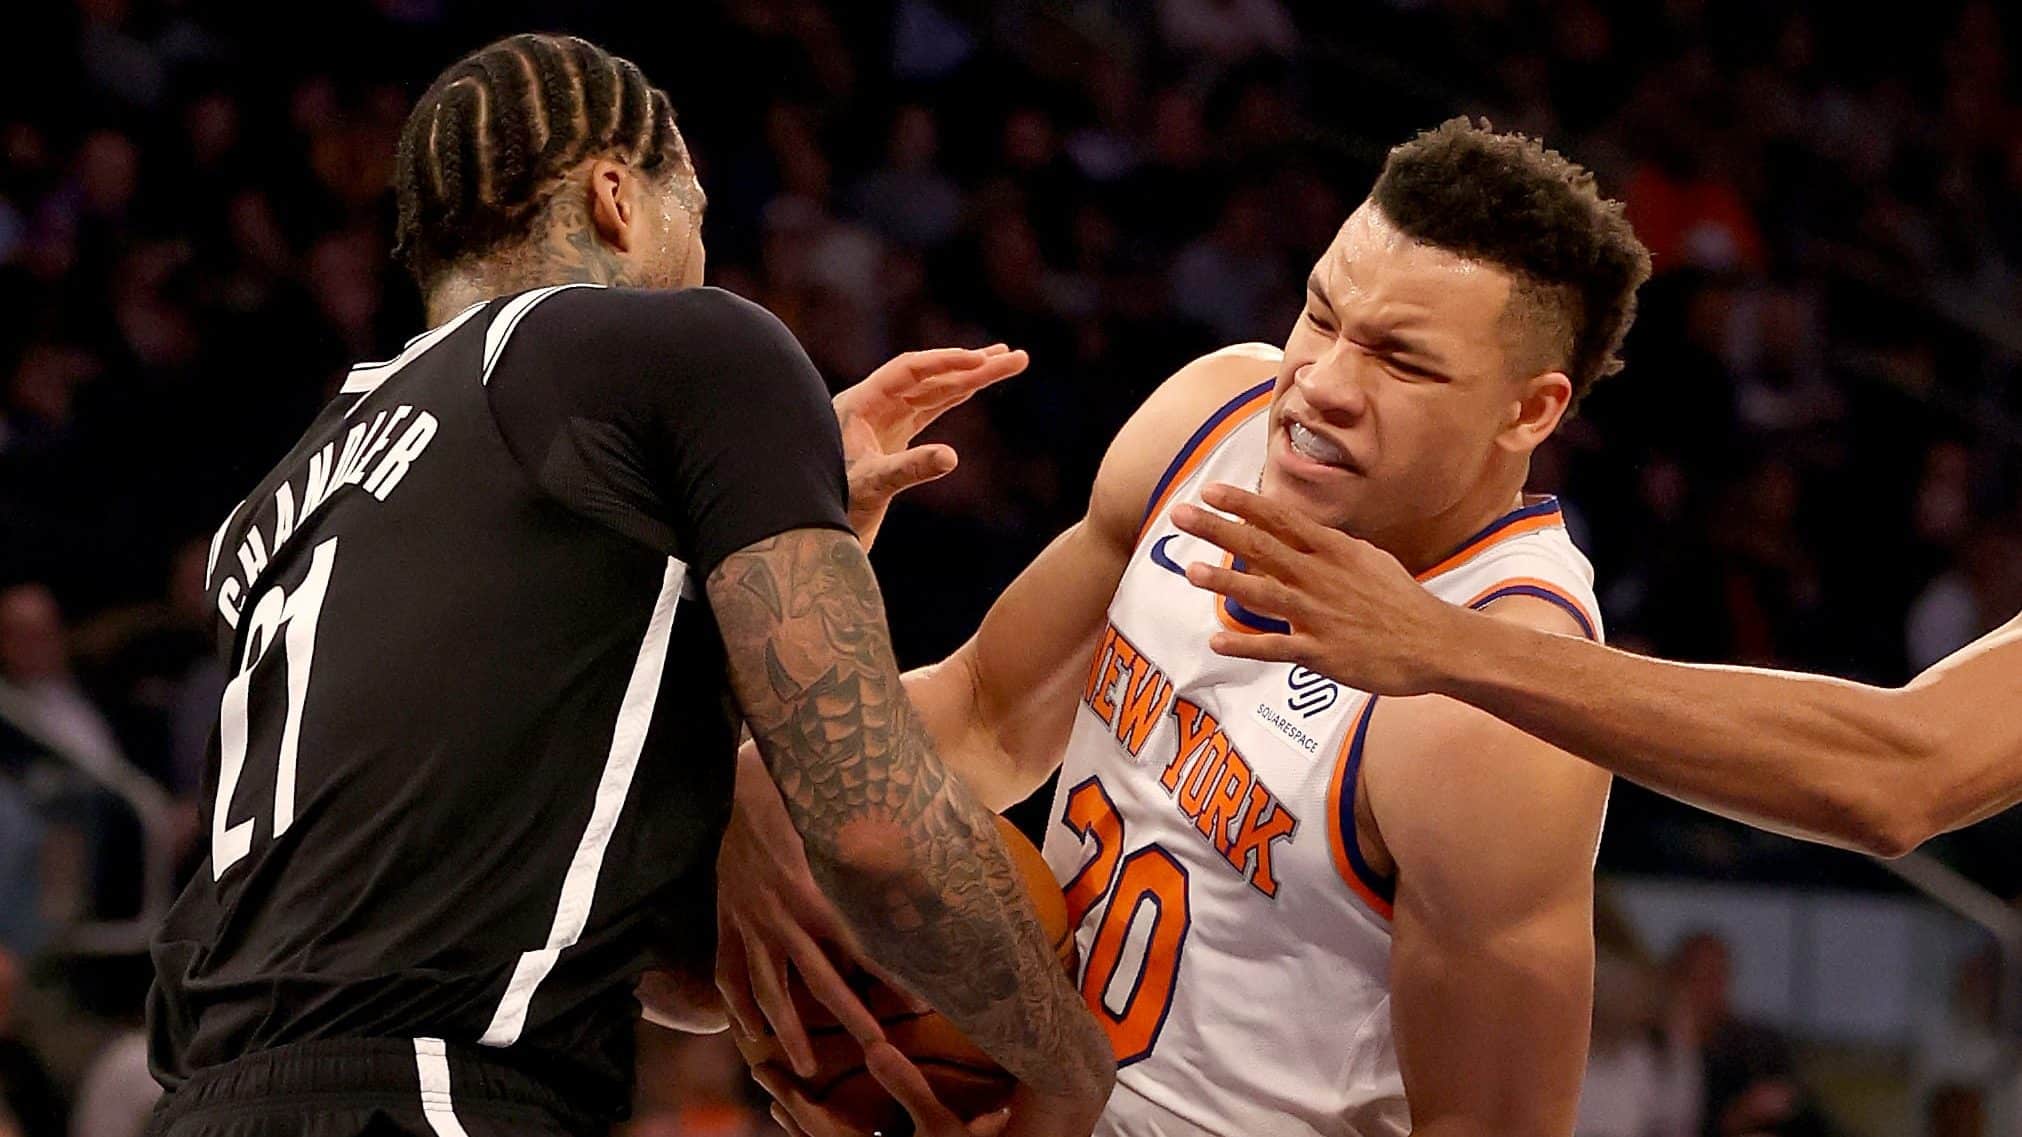 NEW YORK, NEW YORK - JANUARY 26: Wilson Chandler #21 of the Brooklyn Nets and Kevin Knox II #20 of the New York Knicks fight for the ball at Madison Square Garden on January 26, 2020 in New York City.NOTE TO USER: User expressly acknowledges and agrees that, by downloading and or using this photograph, User is consenting to the terms and conditions of the Getty Images License Agreement.